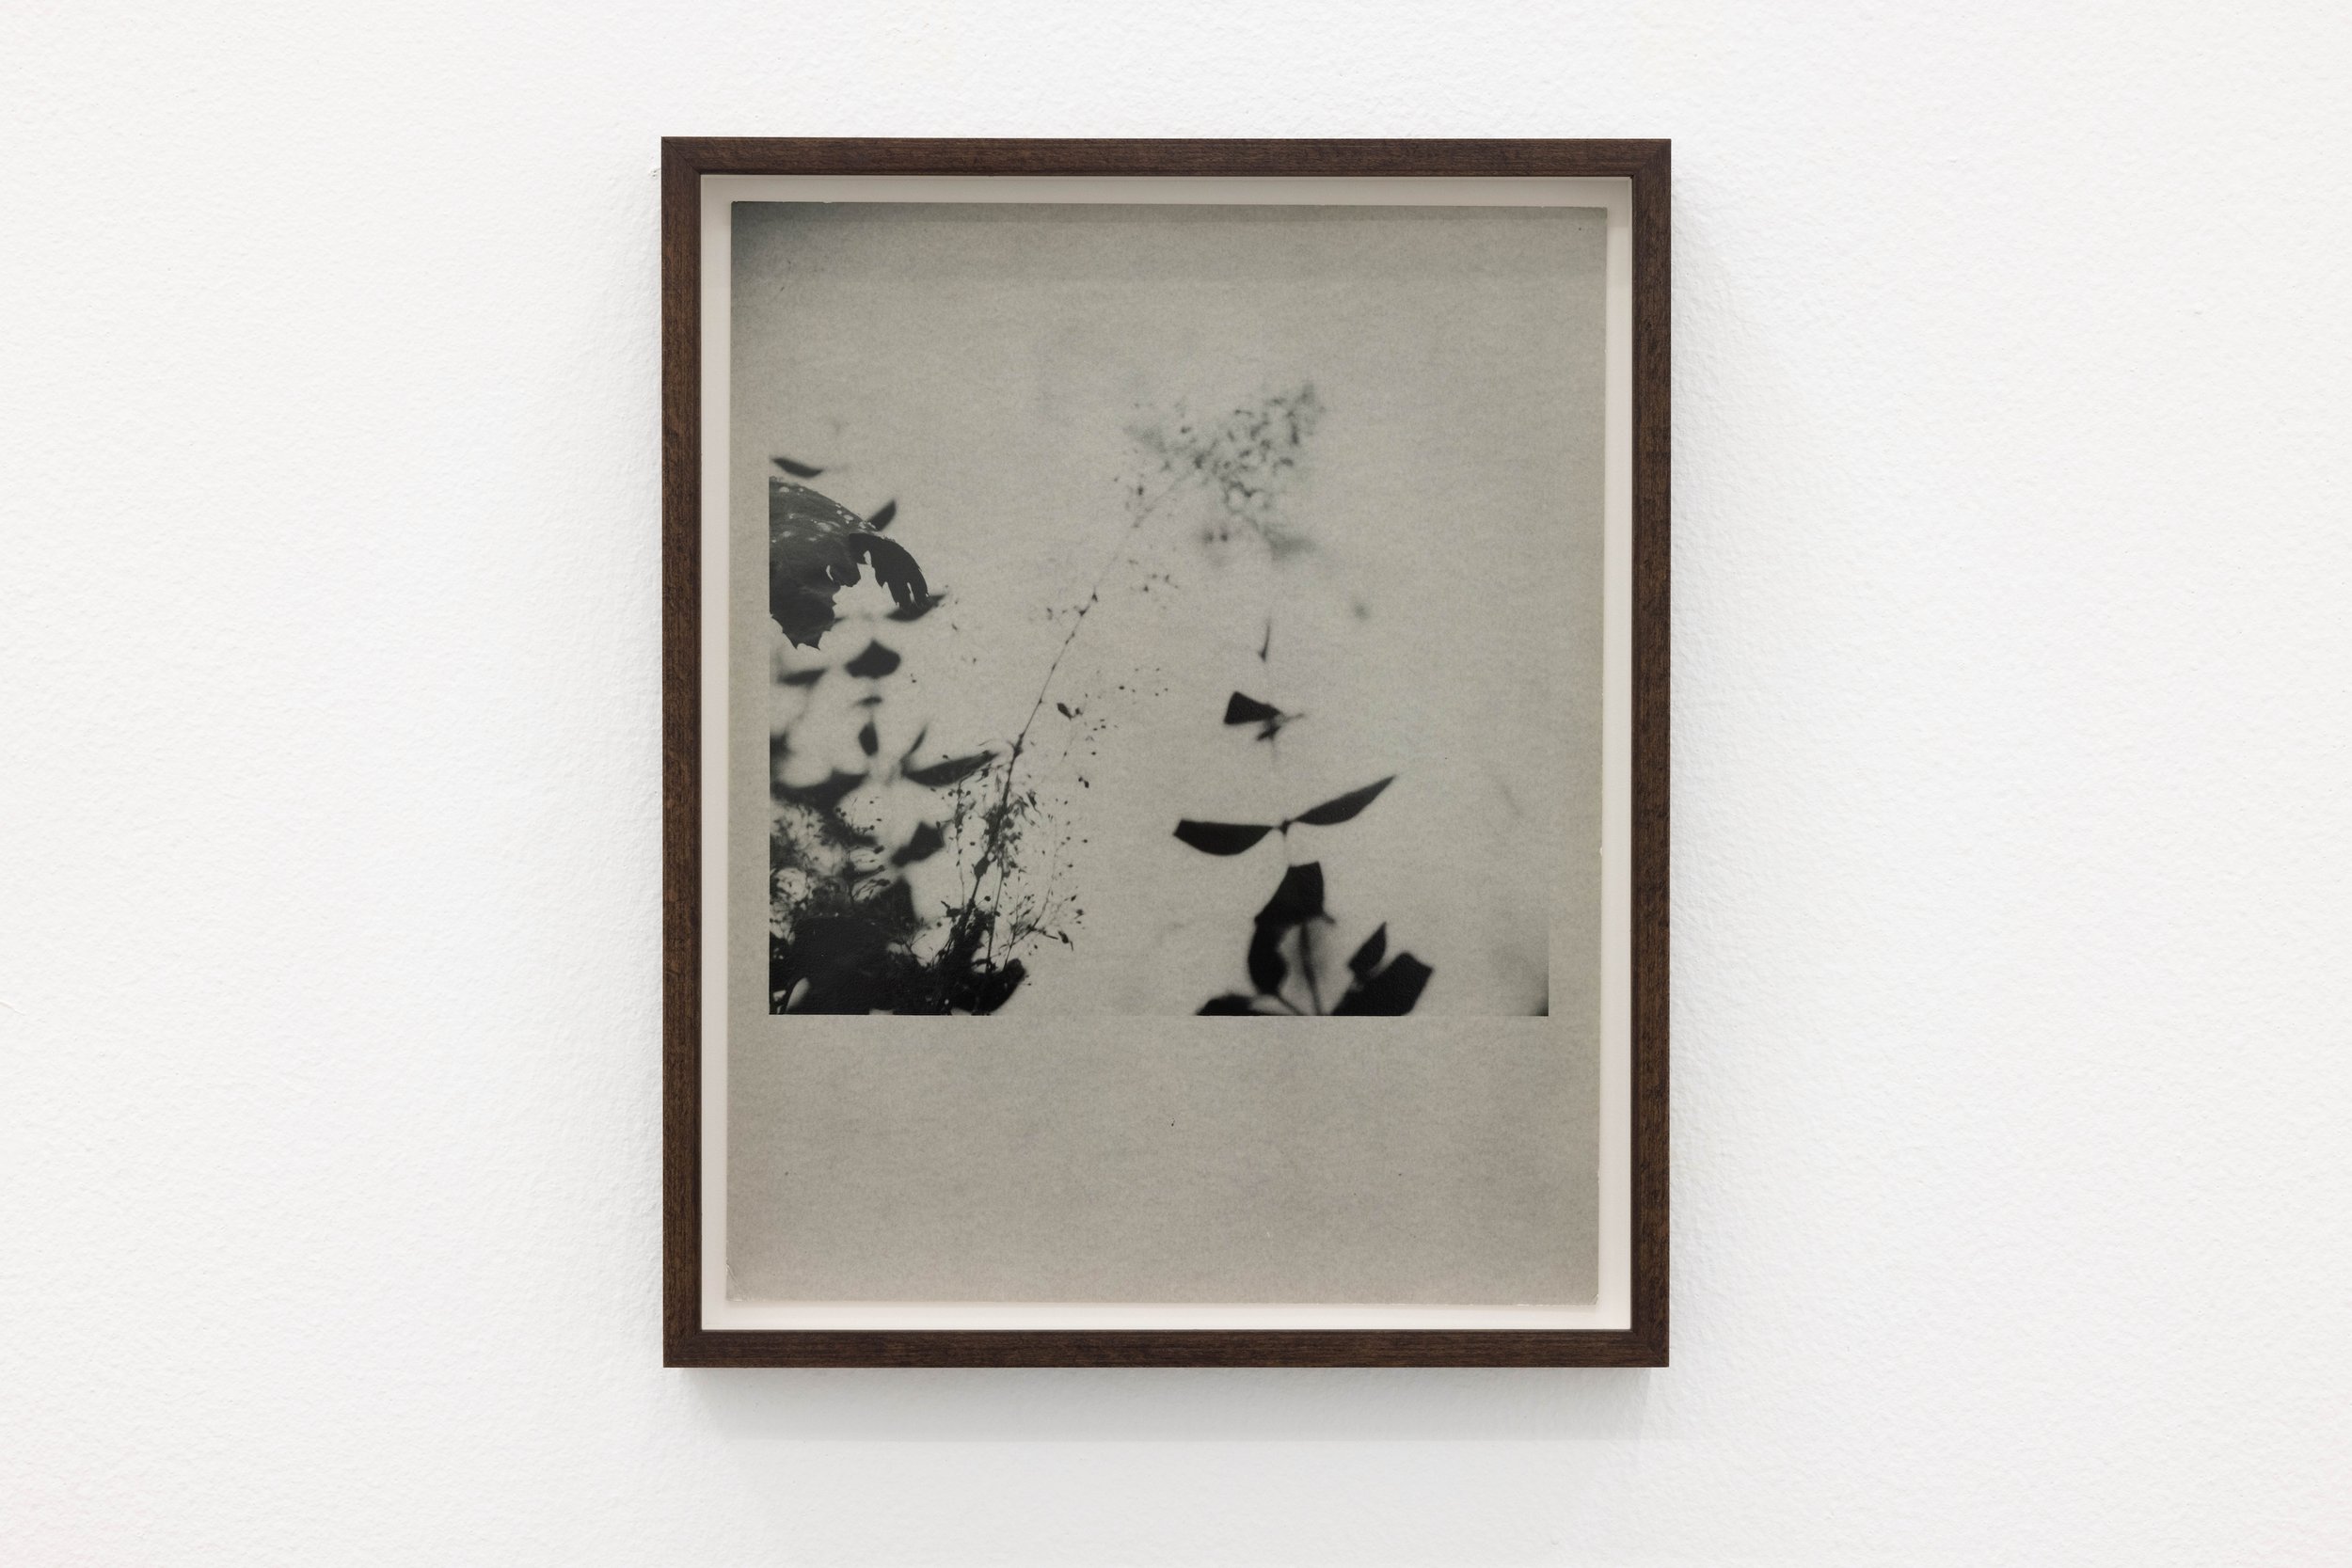  Untitled (flowers), 2014, black and white analogue photograph on baryté paper, 29 x 23 cm / 32 x 26 cm (framed)   